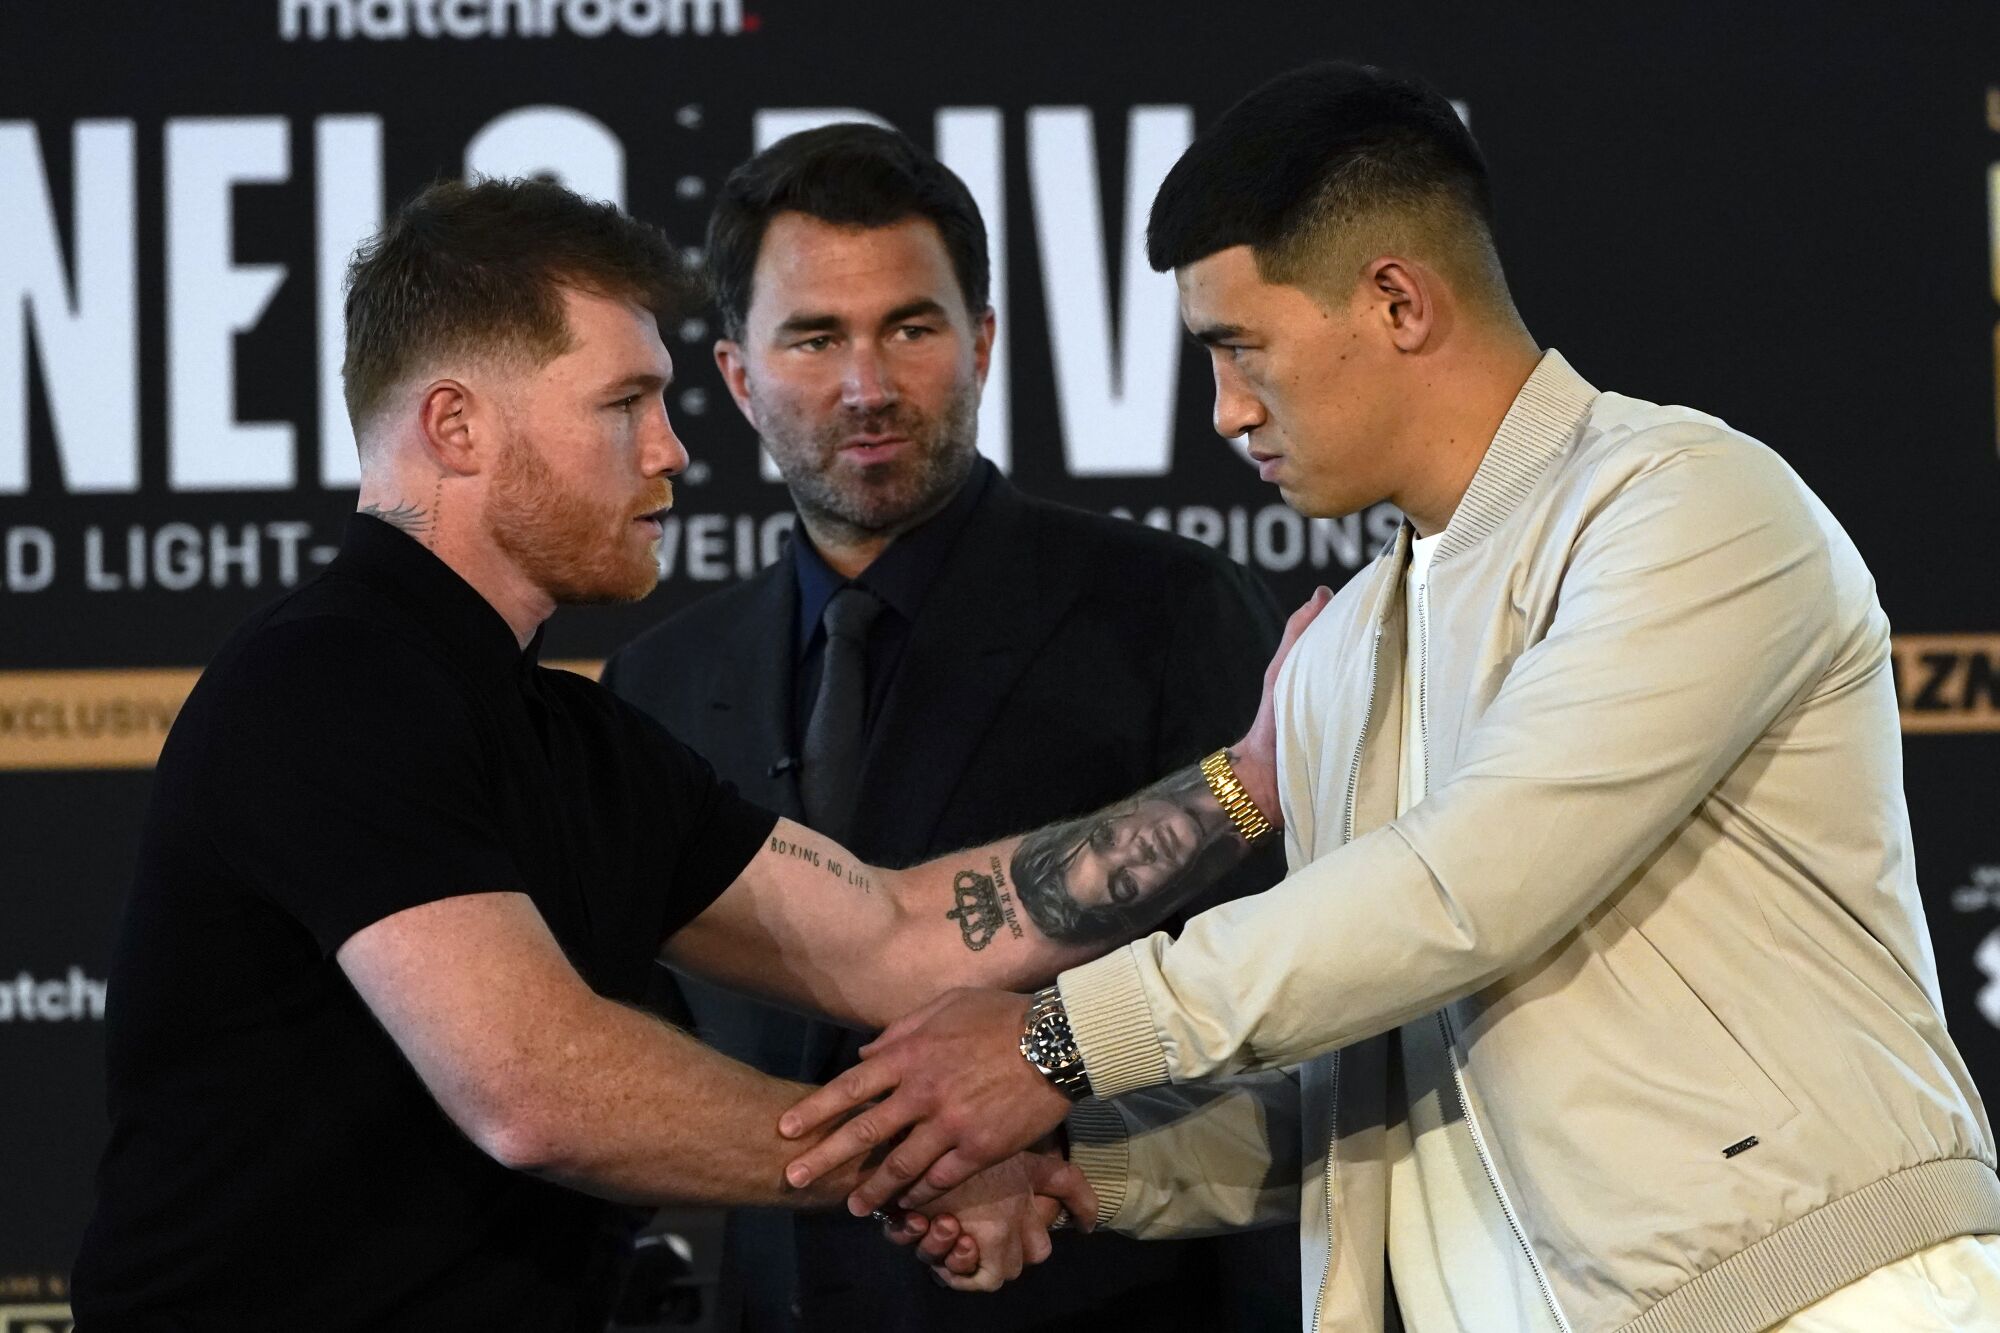 Canelo Álvarez, left, shakes hands with boxer Dmitry Bivol as promoter Eddie Hearn looks on during a weigh-in